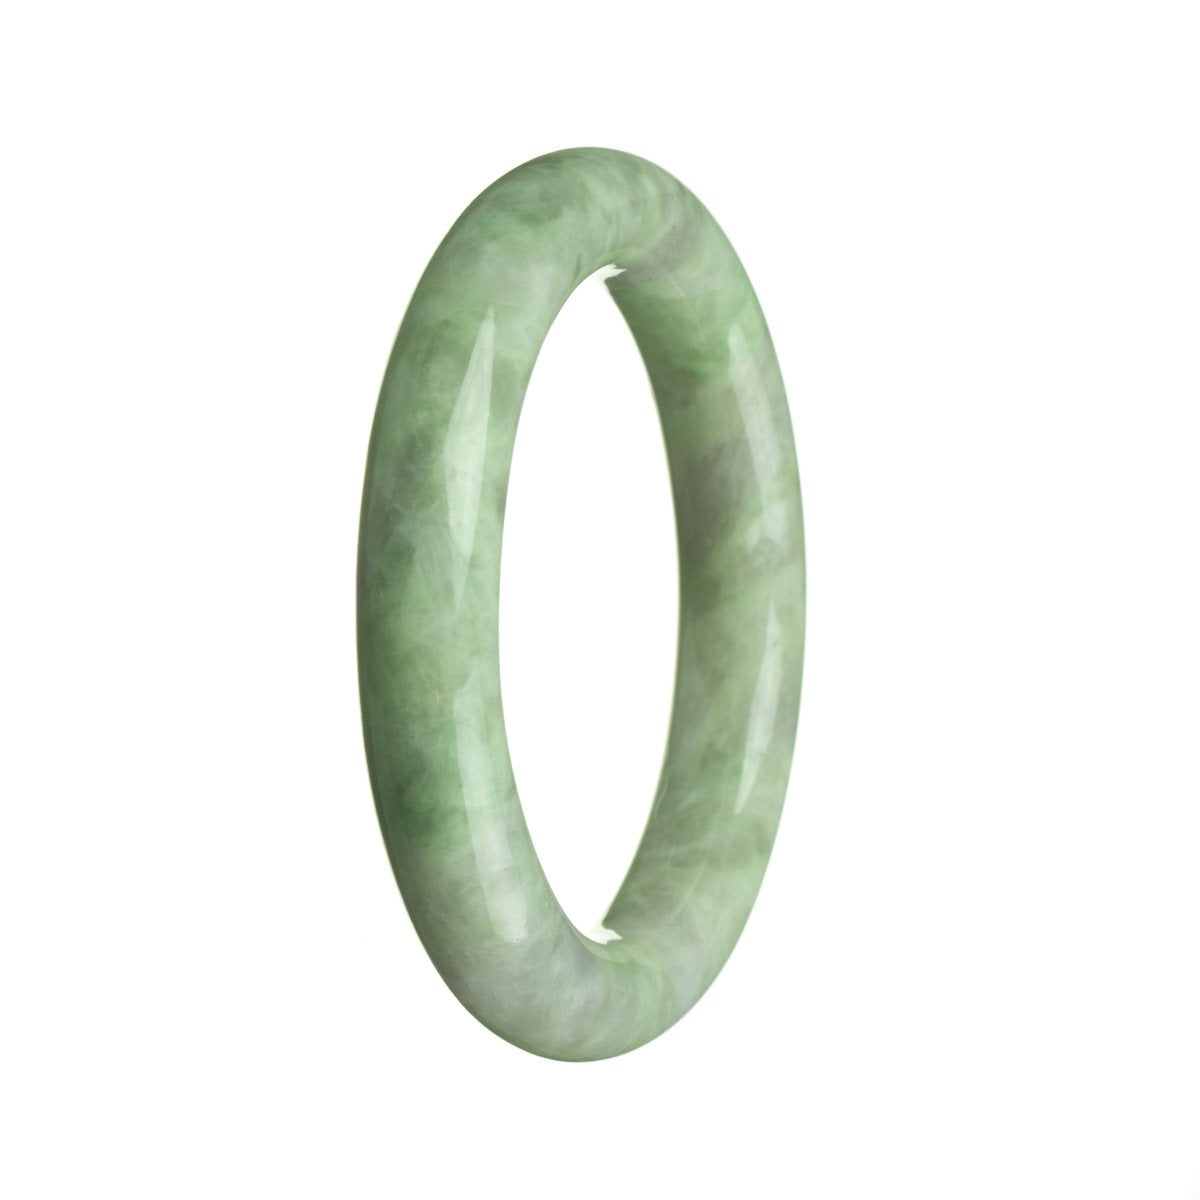 A round bracelet made of certified untreated green Burma jade, measuring 55mm in diameter. Designed by MAYS™.